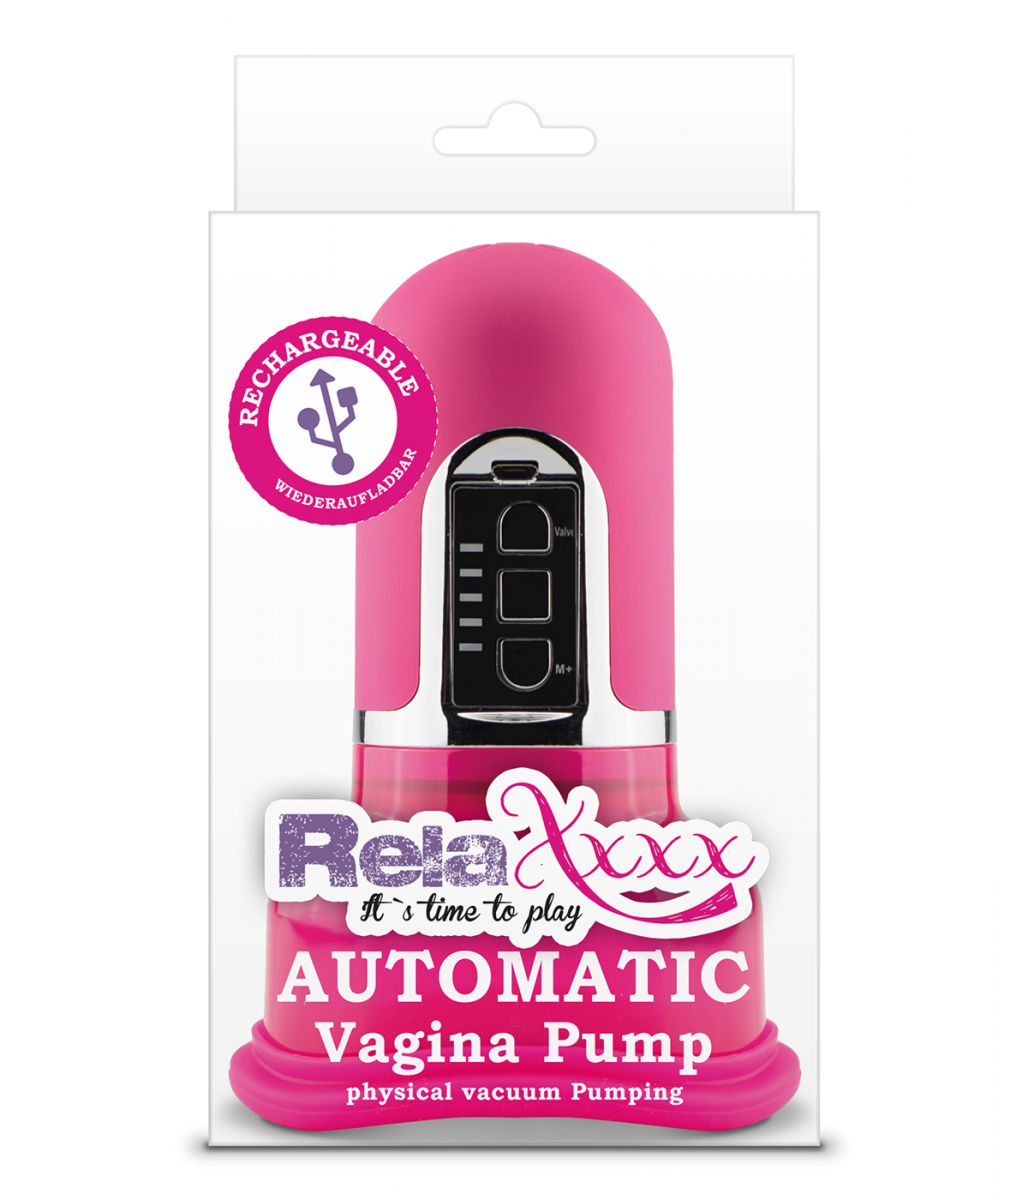 RELAXXXX+%2D+AUTOMATIC+PUSSY+PUMP+RECHARGABLE+PINK